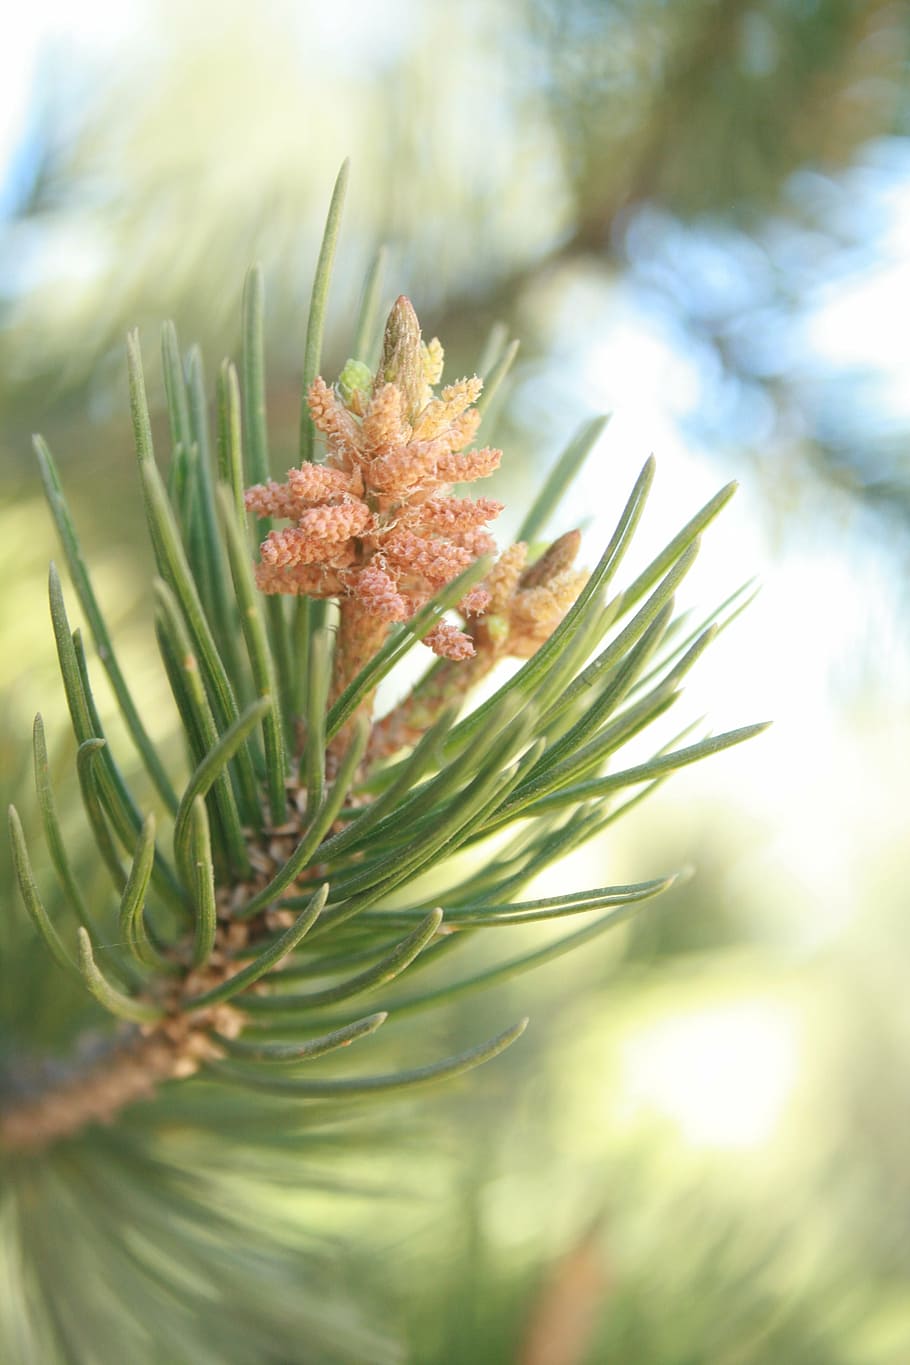 pine, cembriodes, strobilus, cone, tree, pine needles, plant, growth, beauty in nature, close-up